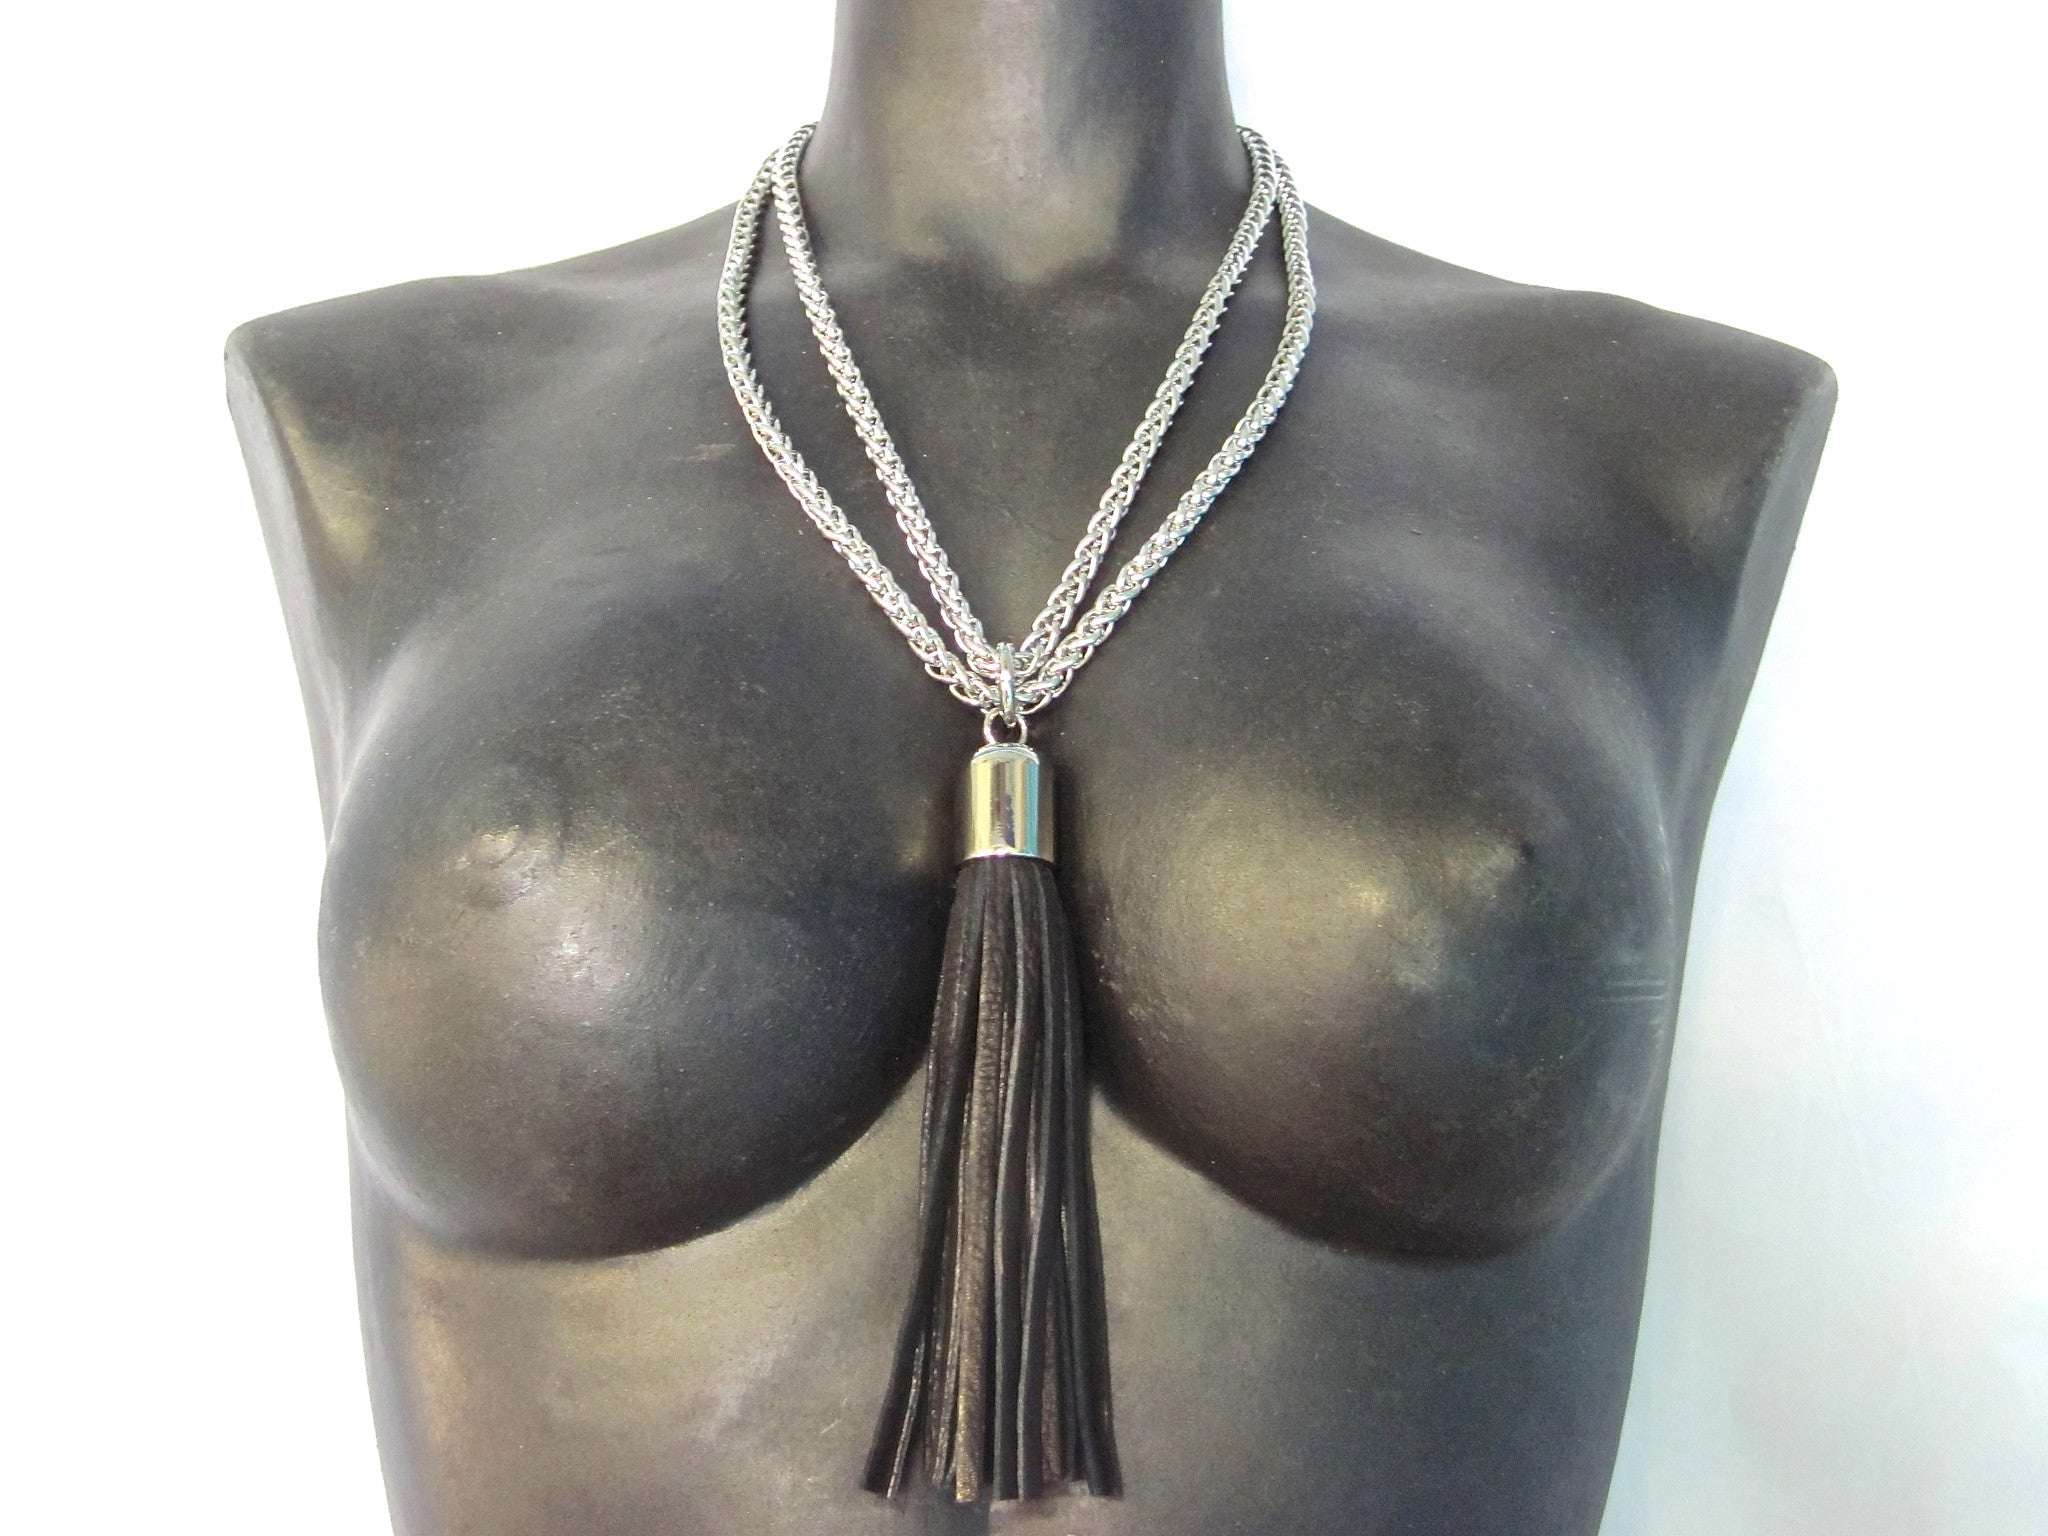 STAINLESS STEEL CHAINS AND LARGE DEERSKIN LEATHER TASSEL NECKLACE  by nyet jewelry.